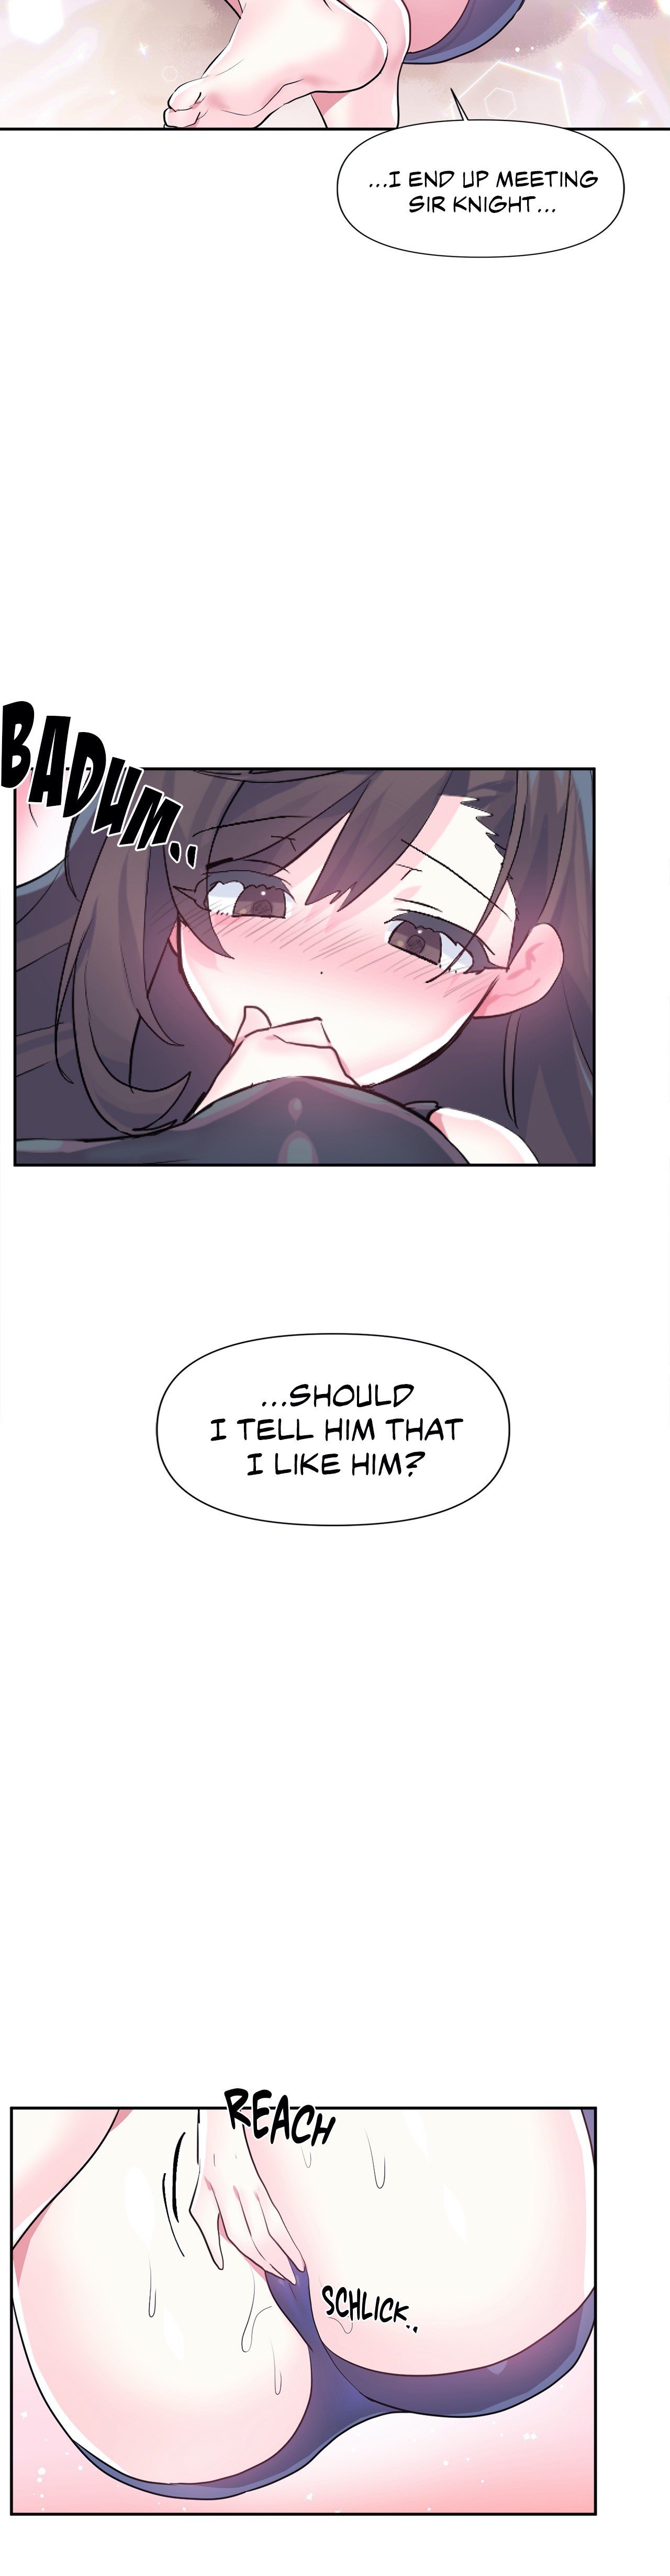 log-in-to-lust-a-land-chap-34-1